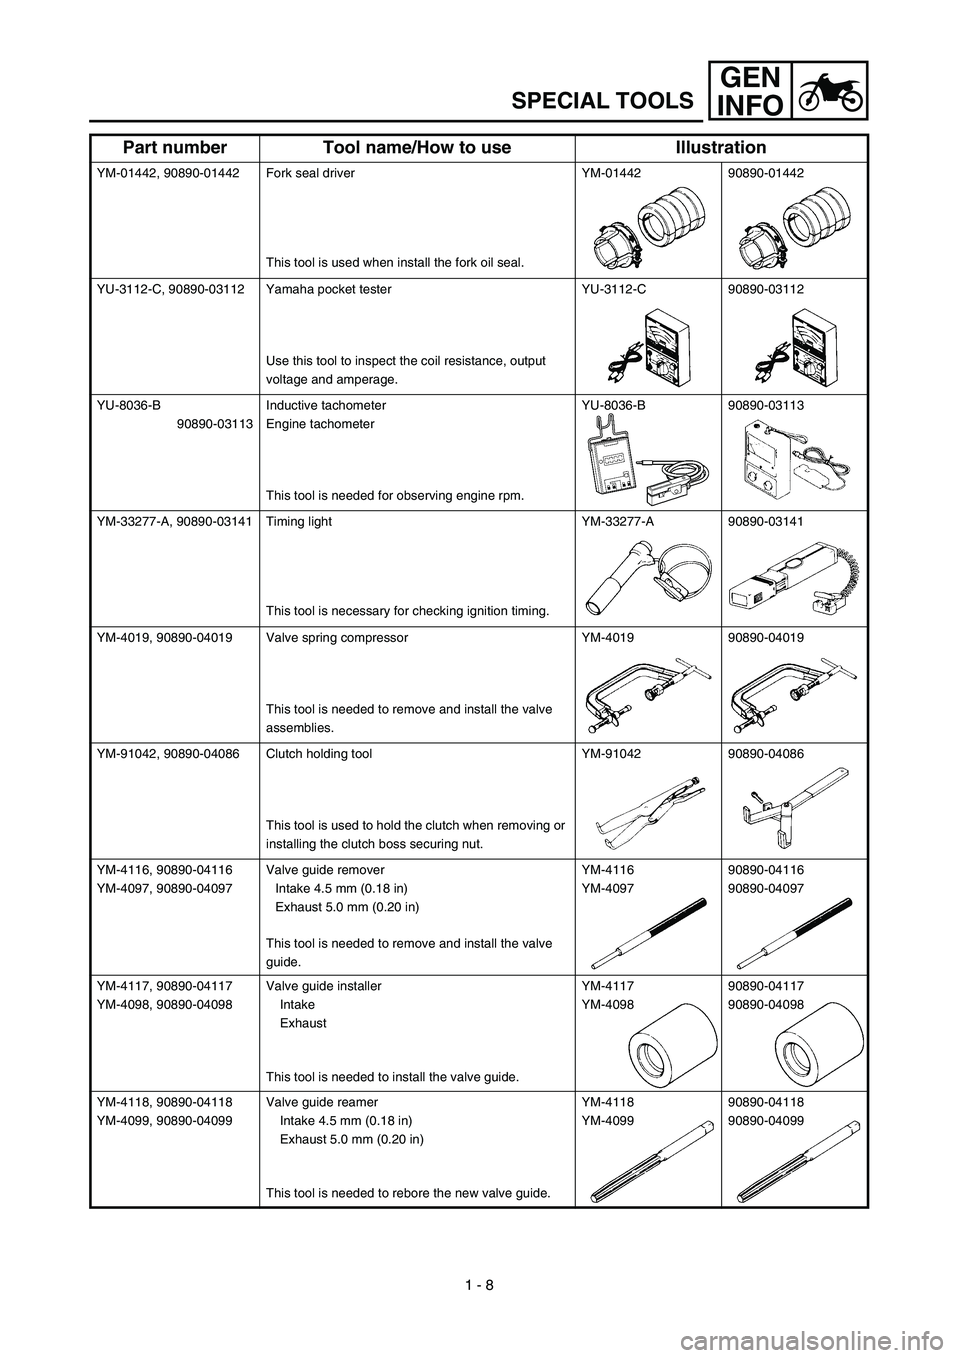 YAMAHA WR 450F 2003  Manuale de Empleo (in Spanish) GEN
INFO
1 - 8
SPECIAL TOOLS
YM-01442, 90890-01442 Fork seal driver
This tool is used when install the fork oil seal.YM-01442 90890-01442
YU-3112-C, 90890-03112 Yamaha pocket tester
Use this tool to i